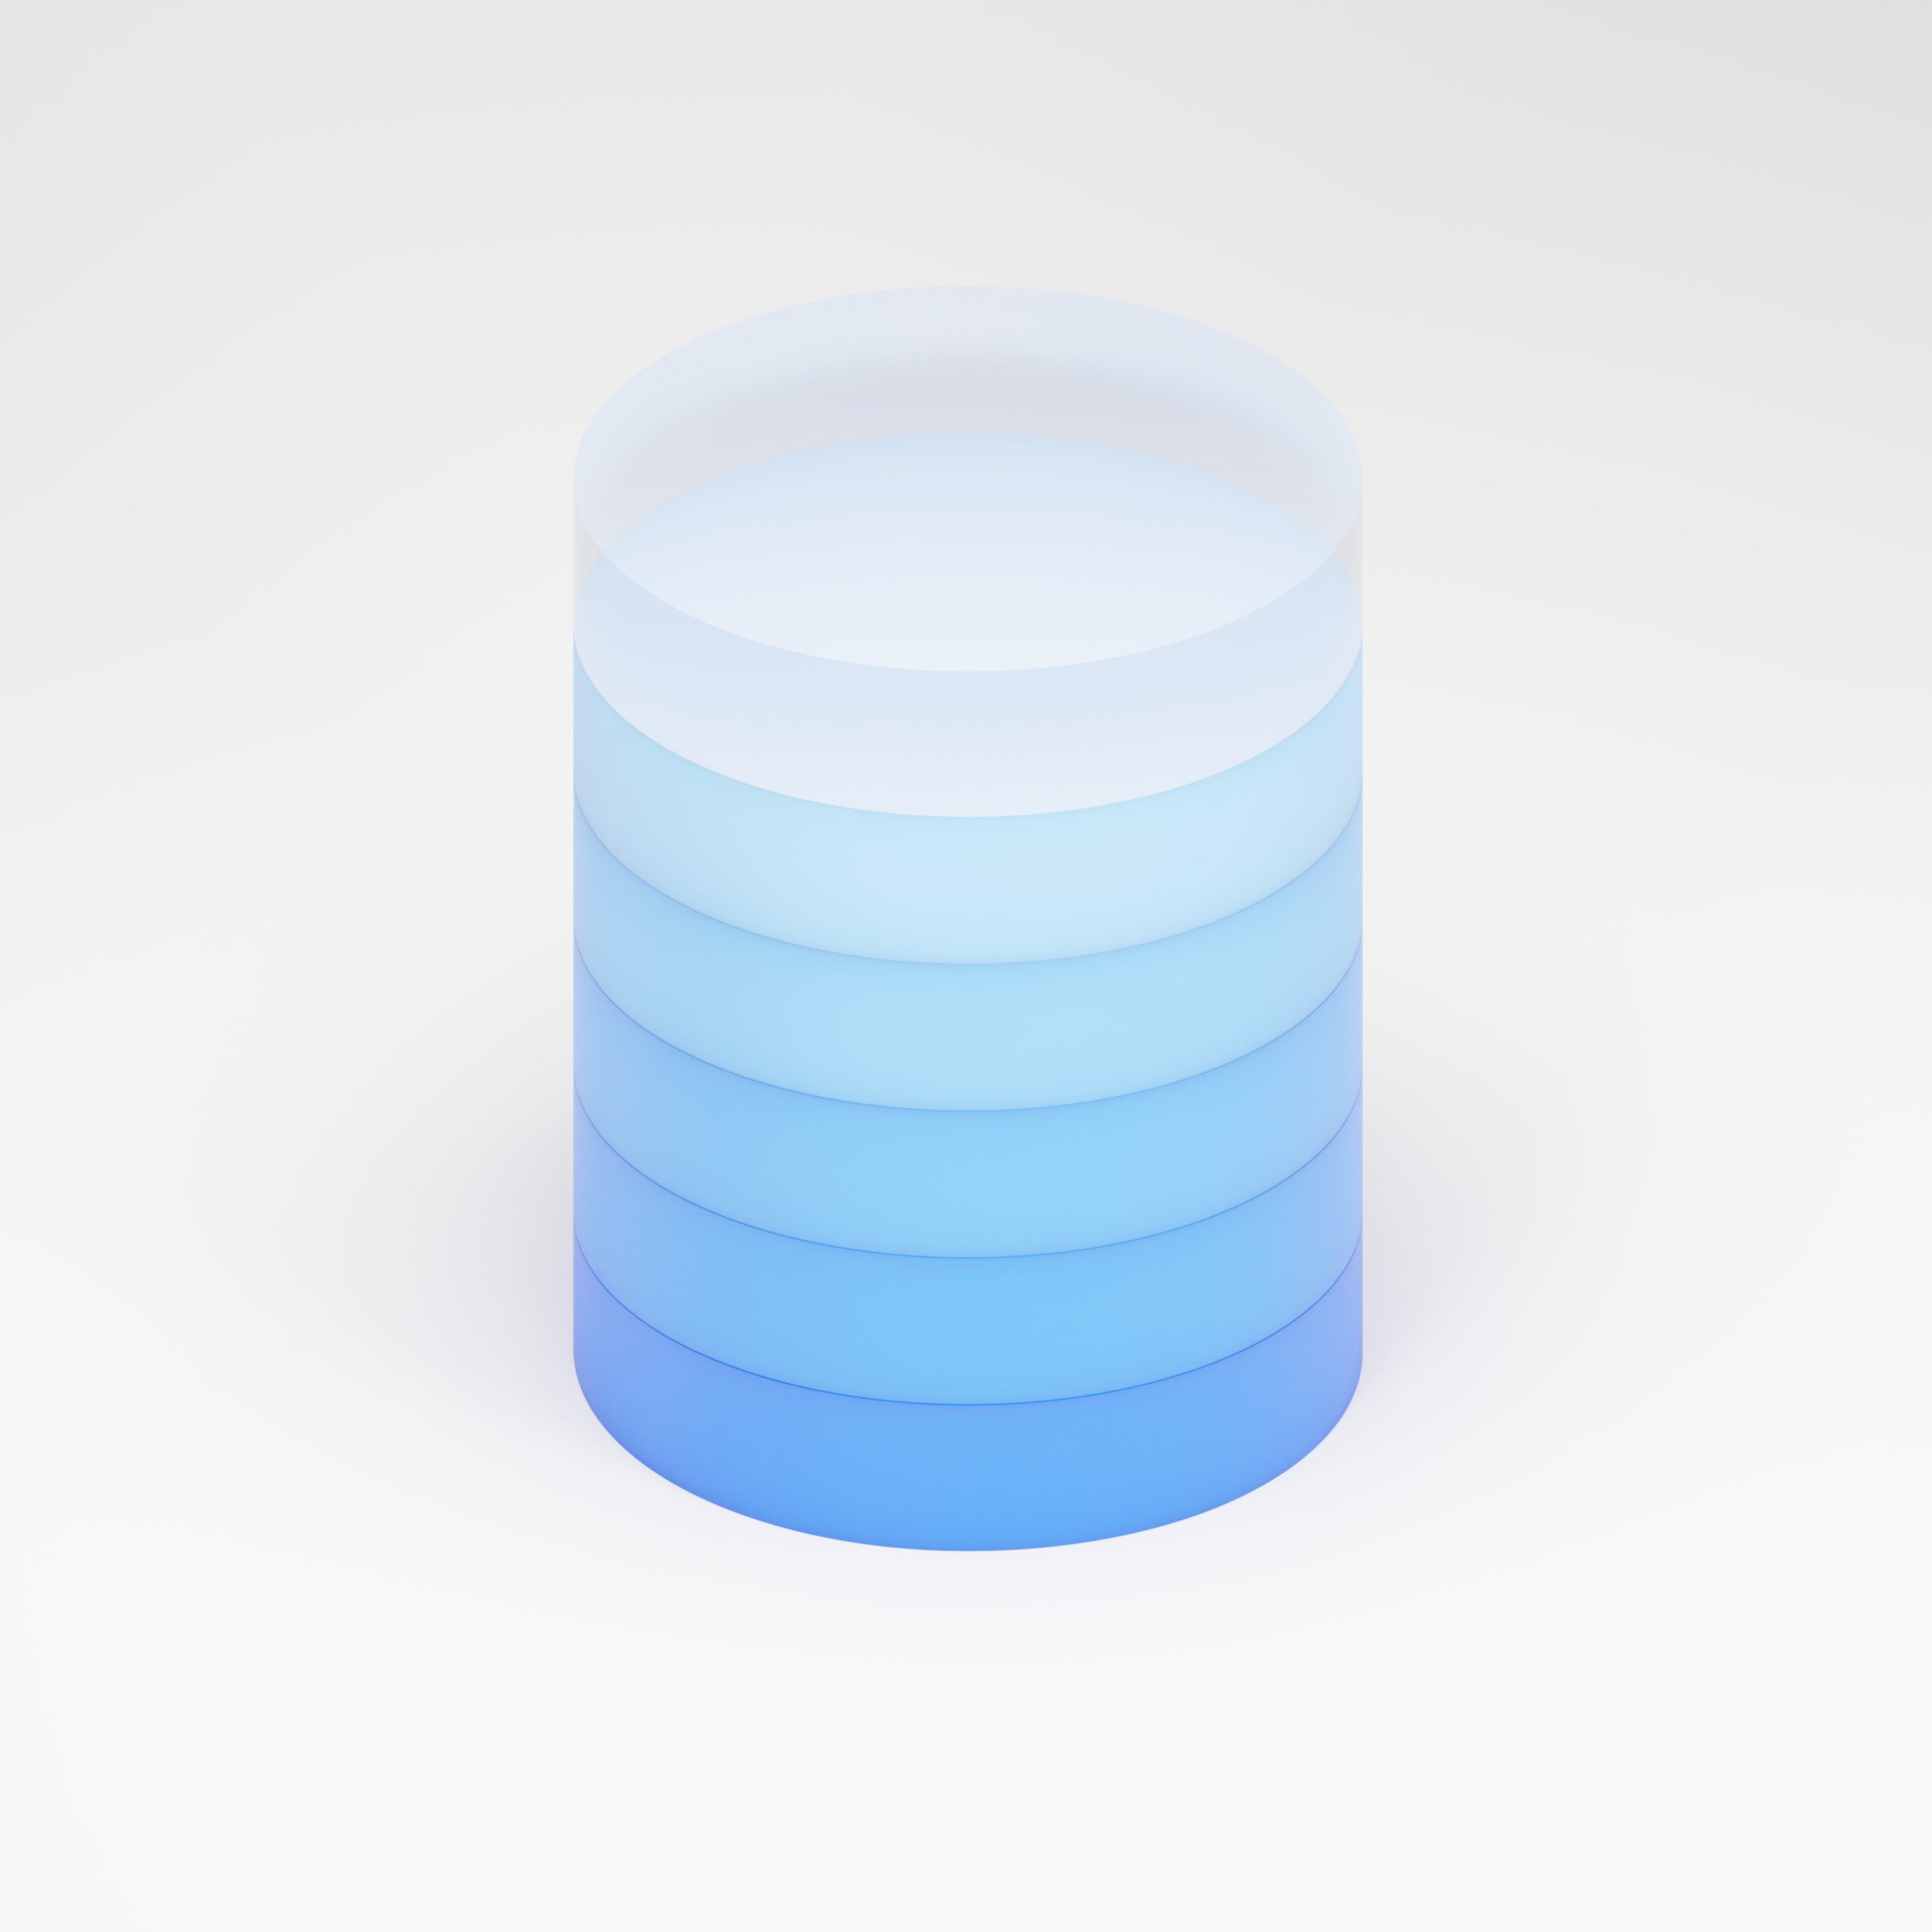 3D picture of a Database in blue color